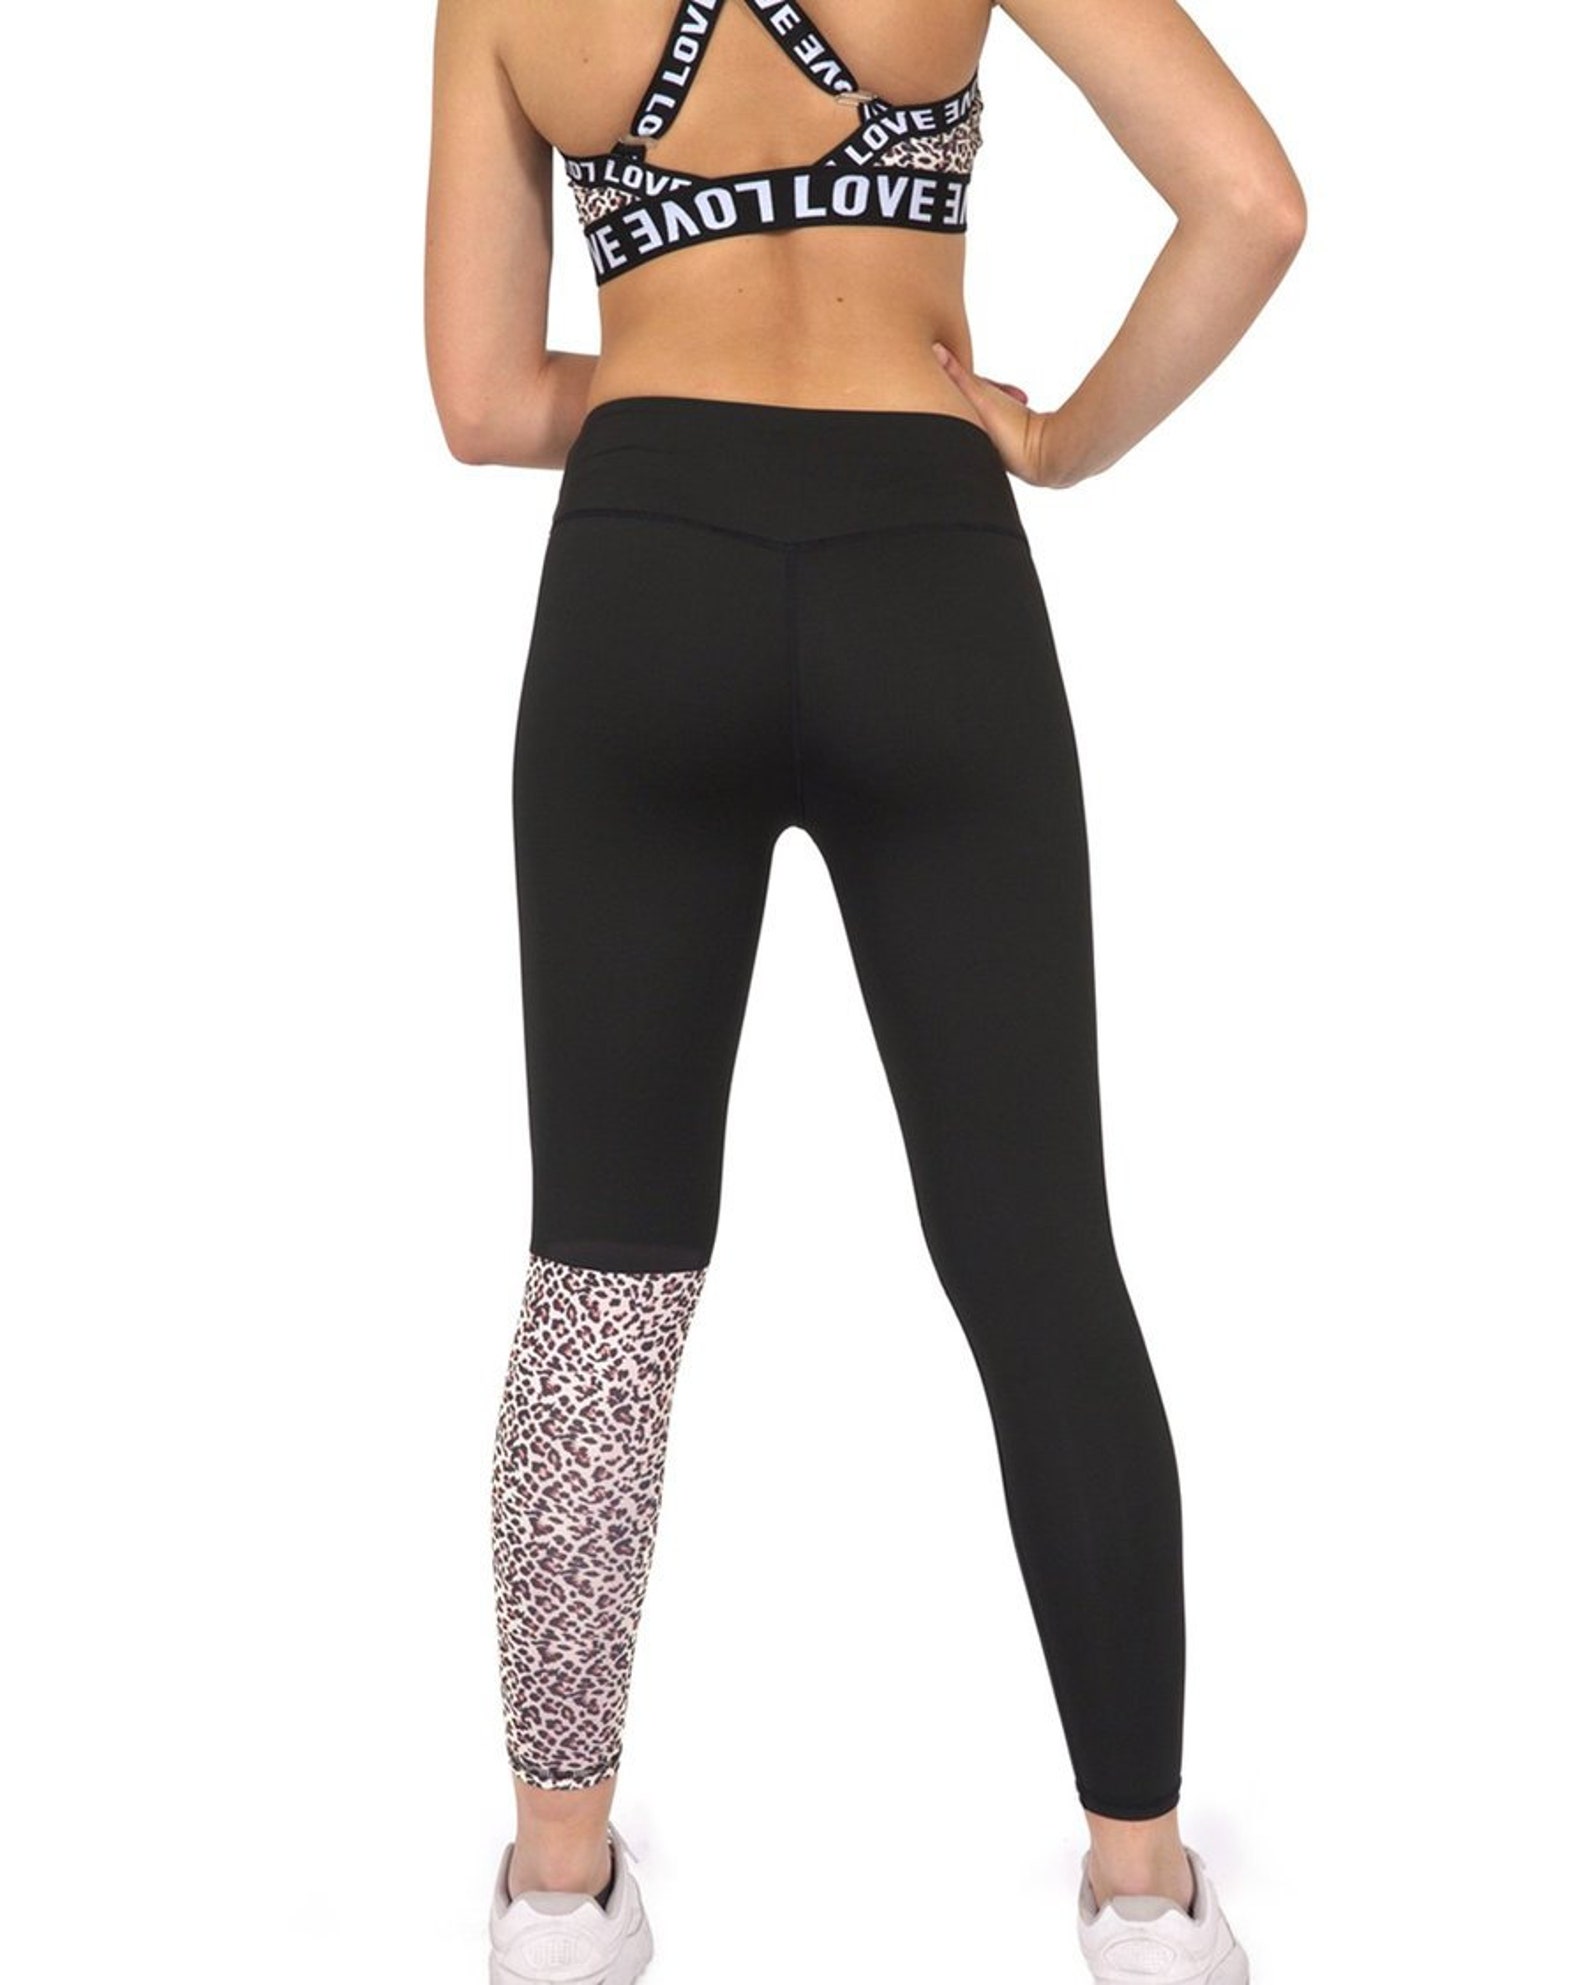 Best Leopard workout leggings for Weight Loss